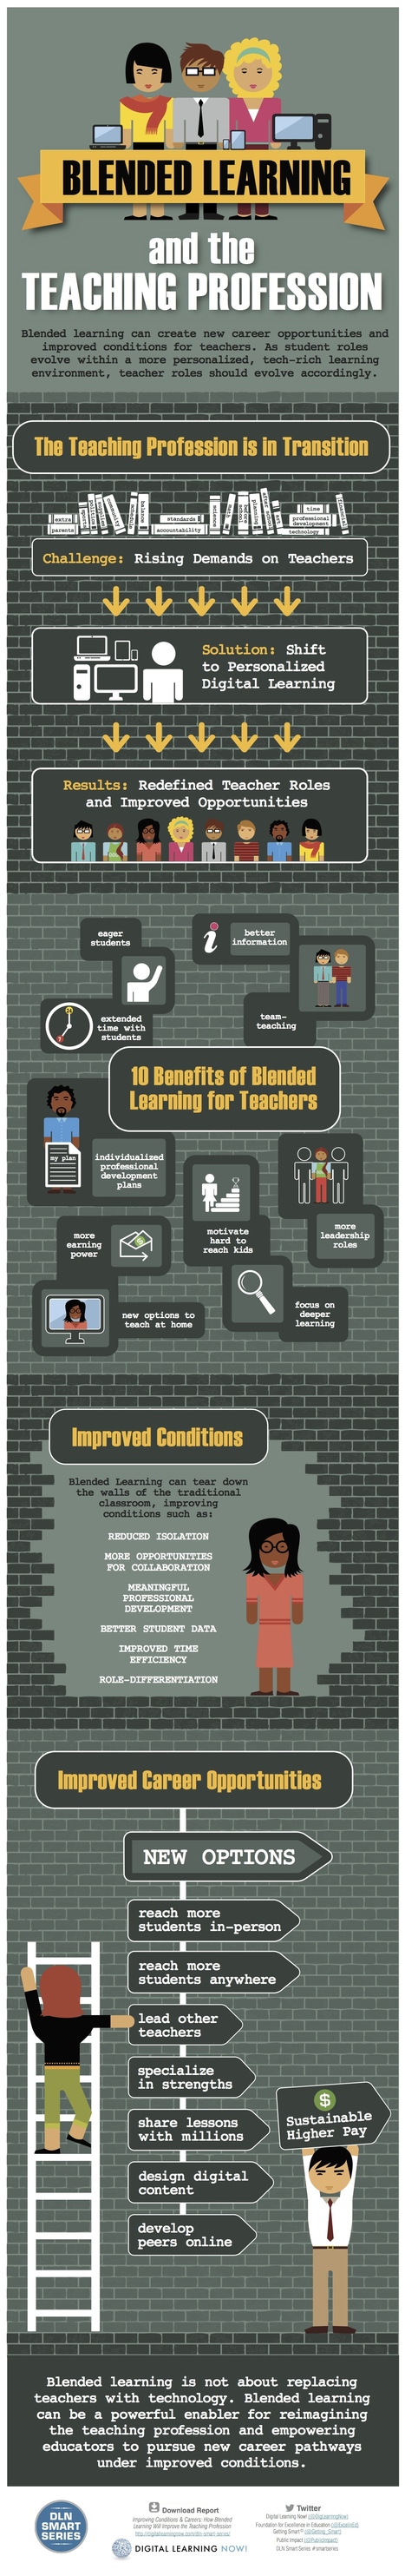 Blended Learning & The Teaching Profession [Infographic] | Strictly pedagogical | Scoop.it